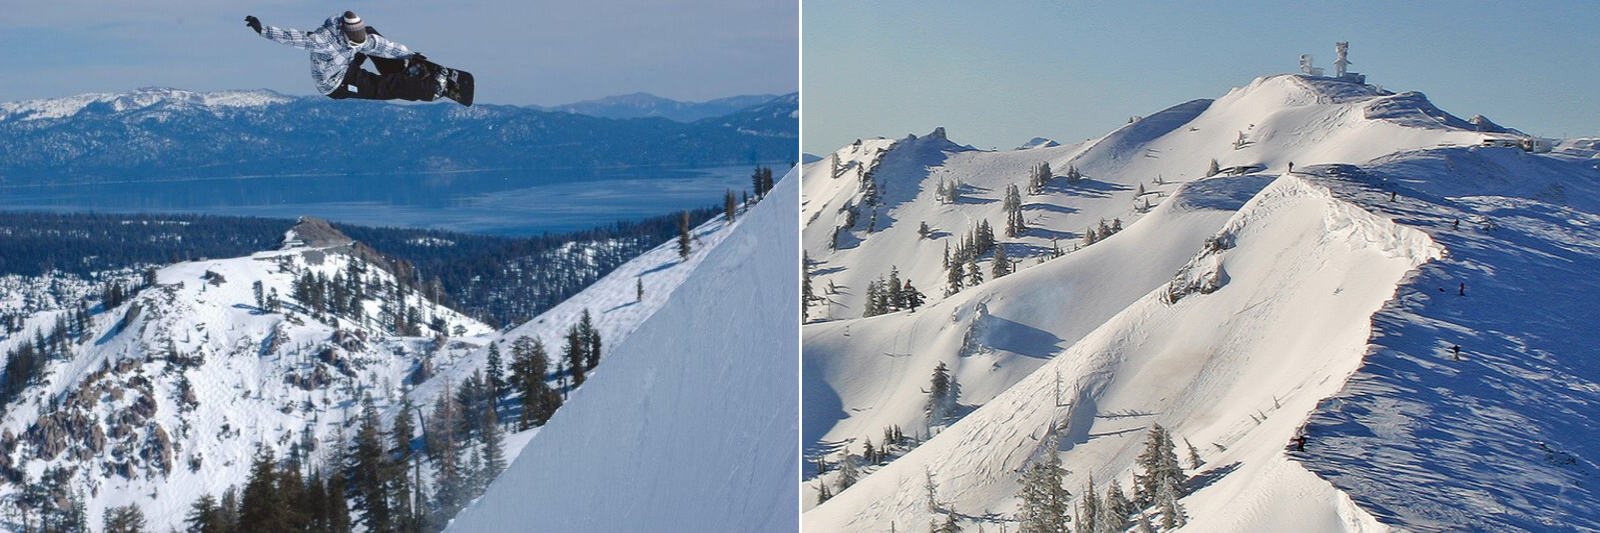 Squaw Valley in winter with Lake Tahoe in the background and Estelle Bowl at Alpine Meadows | Photo: Eddy Ancinas | Squaw Valley and Alpine Meadows: Tales from Two Valleys 70th Anniversary Edition